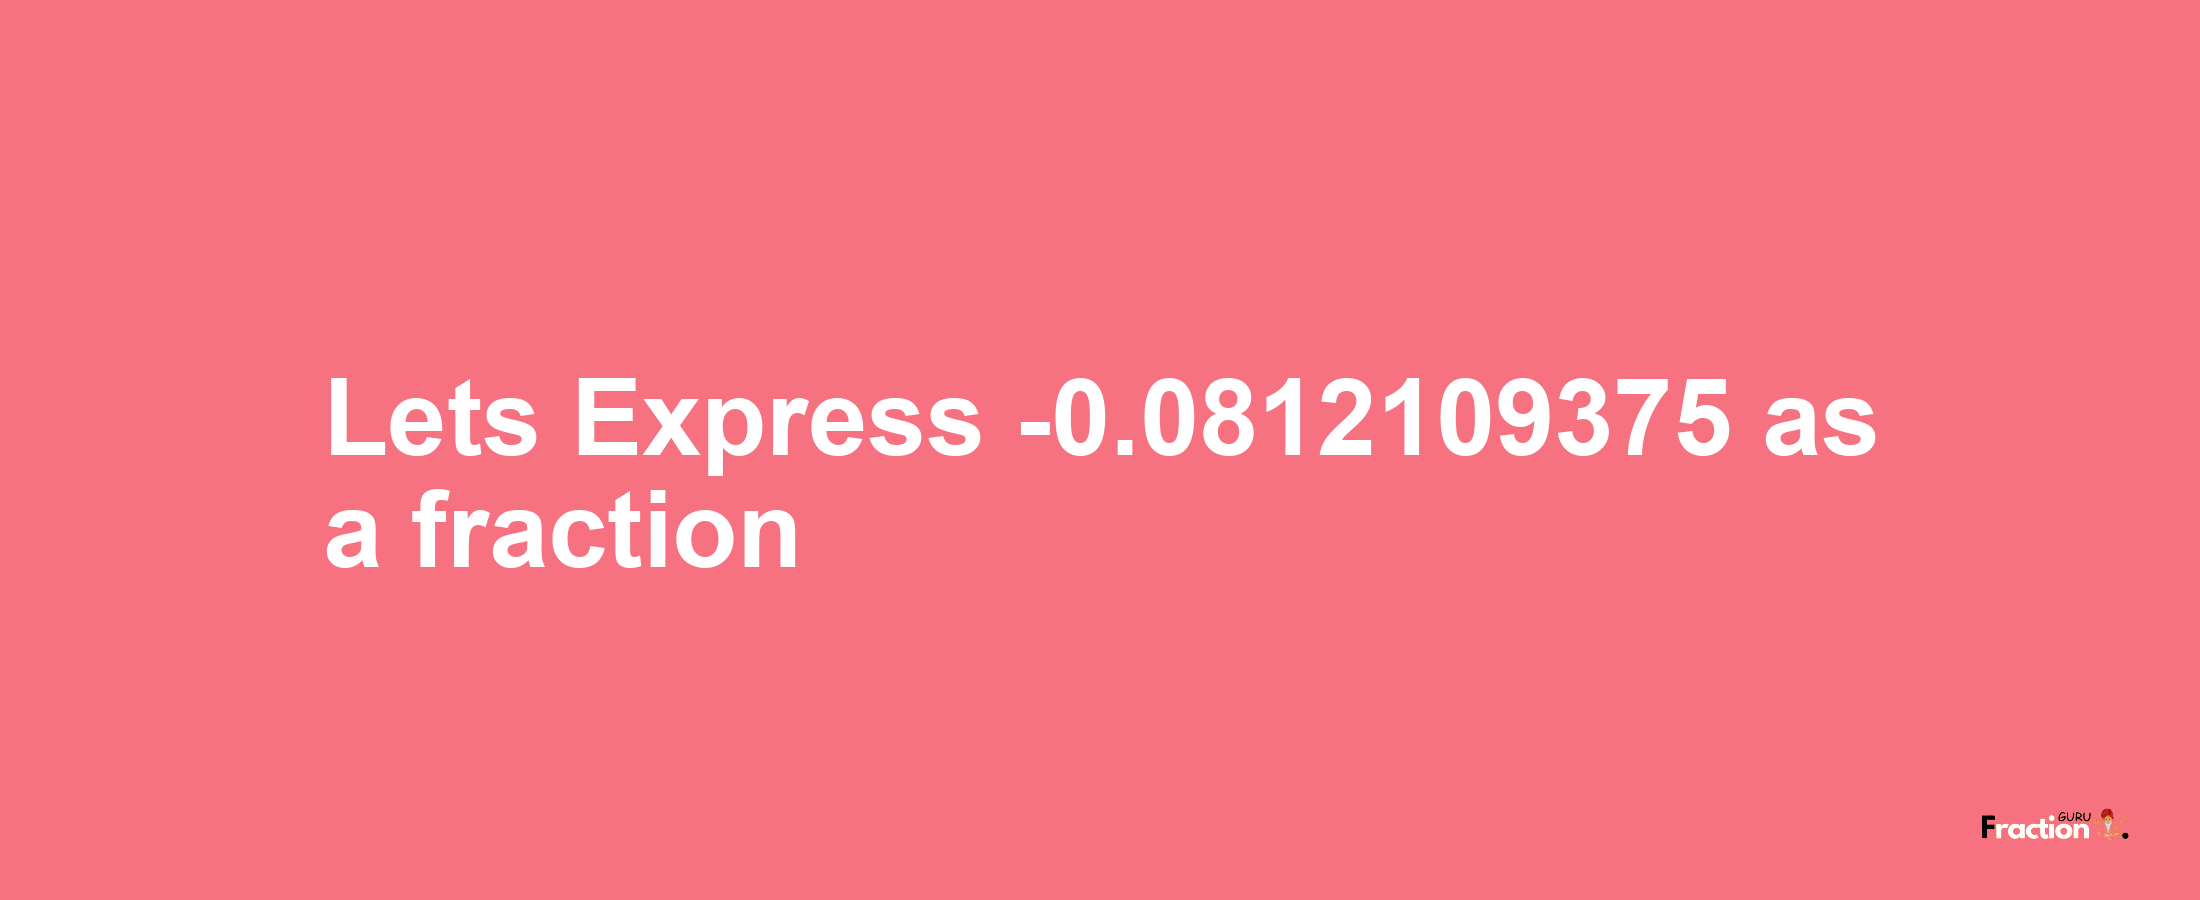 Lets Express -0.0812109375 as afraction